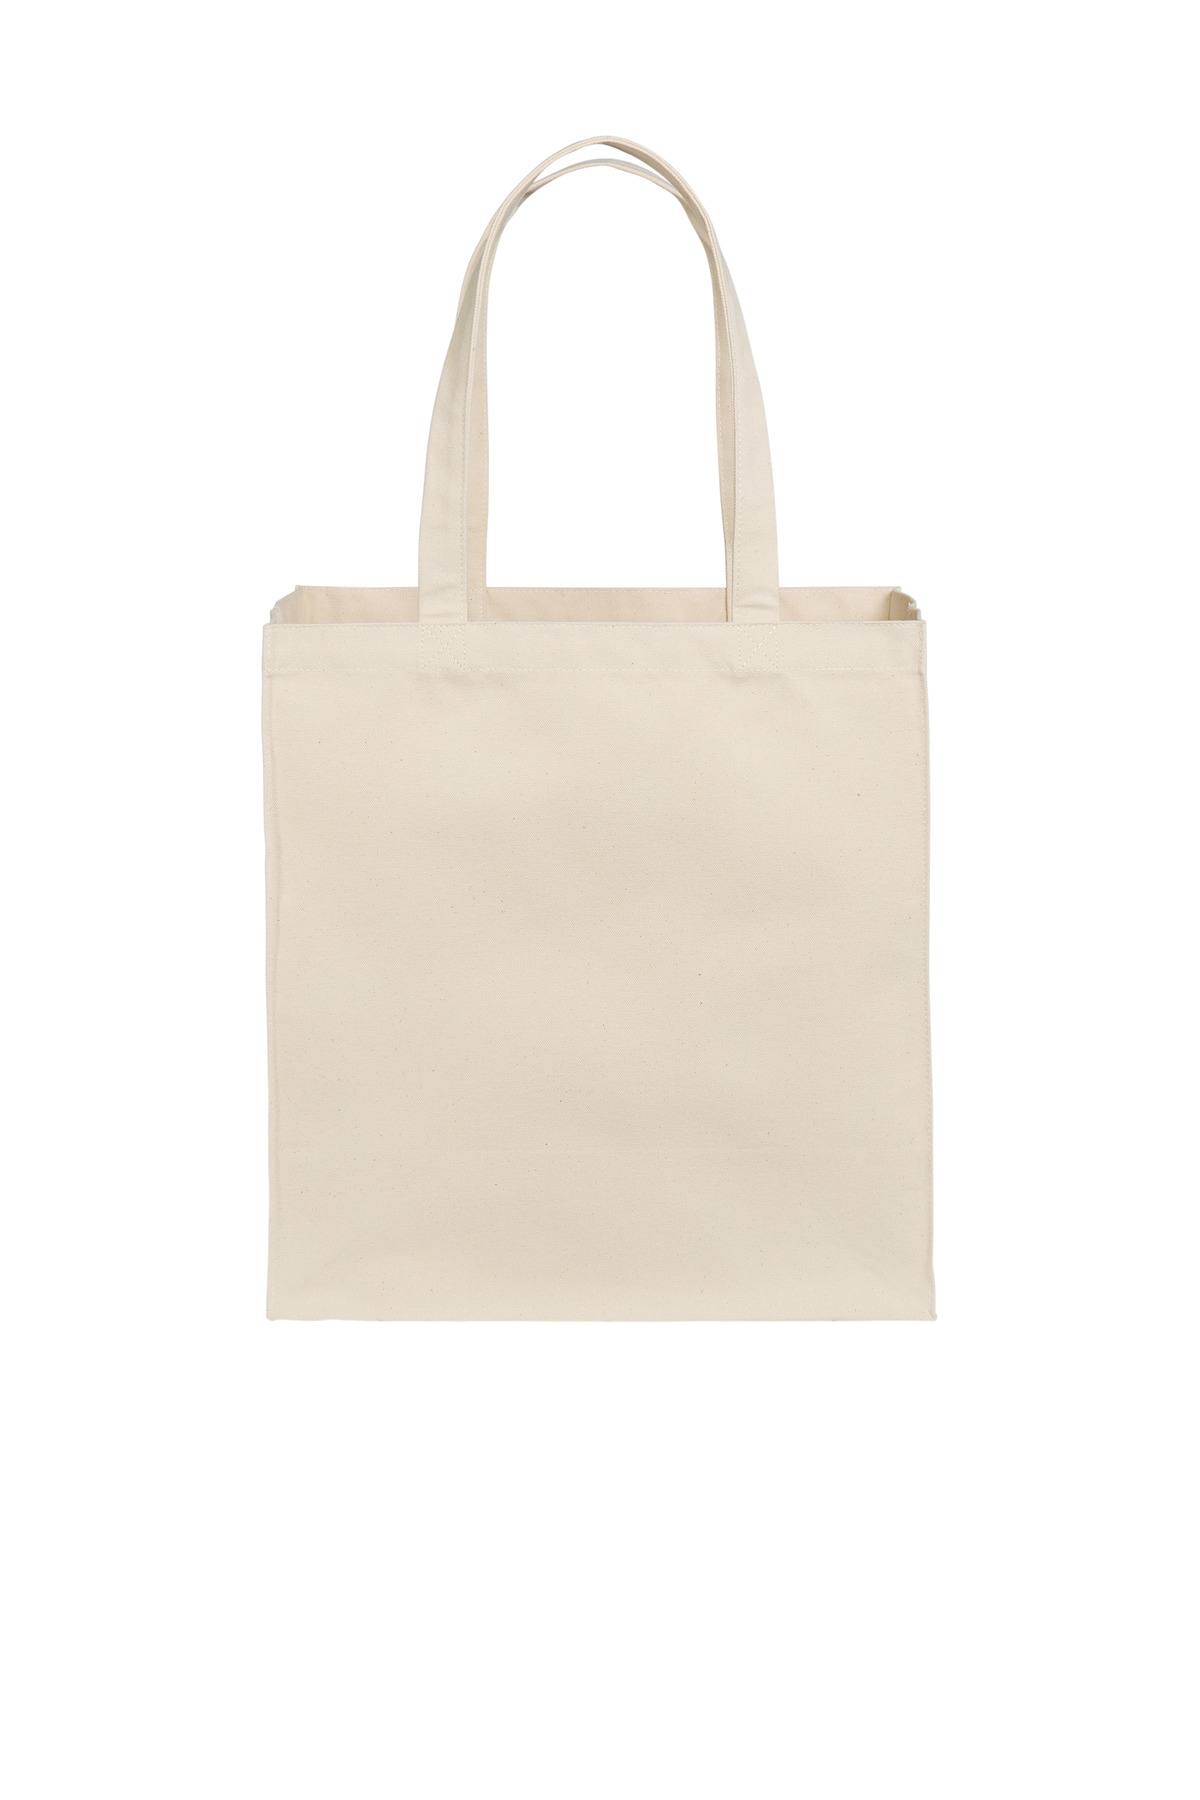 Port Authority Cotton Canvas Over-the-Shoulder Tote-Port Authority